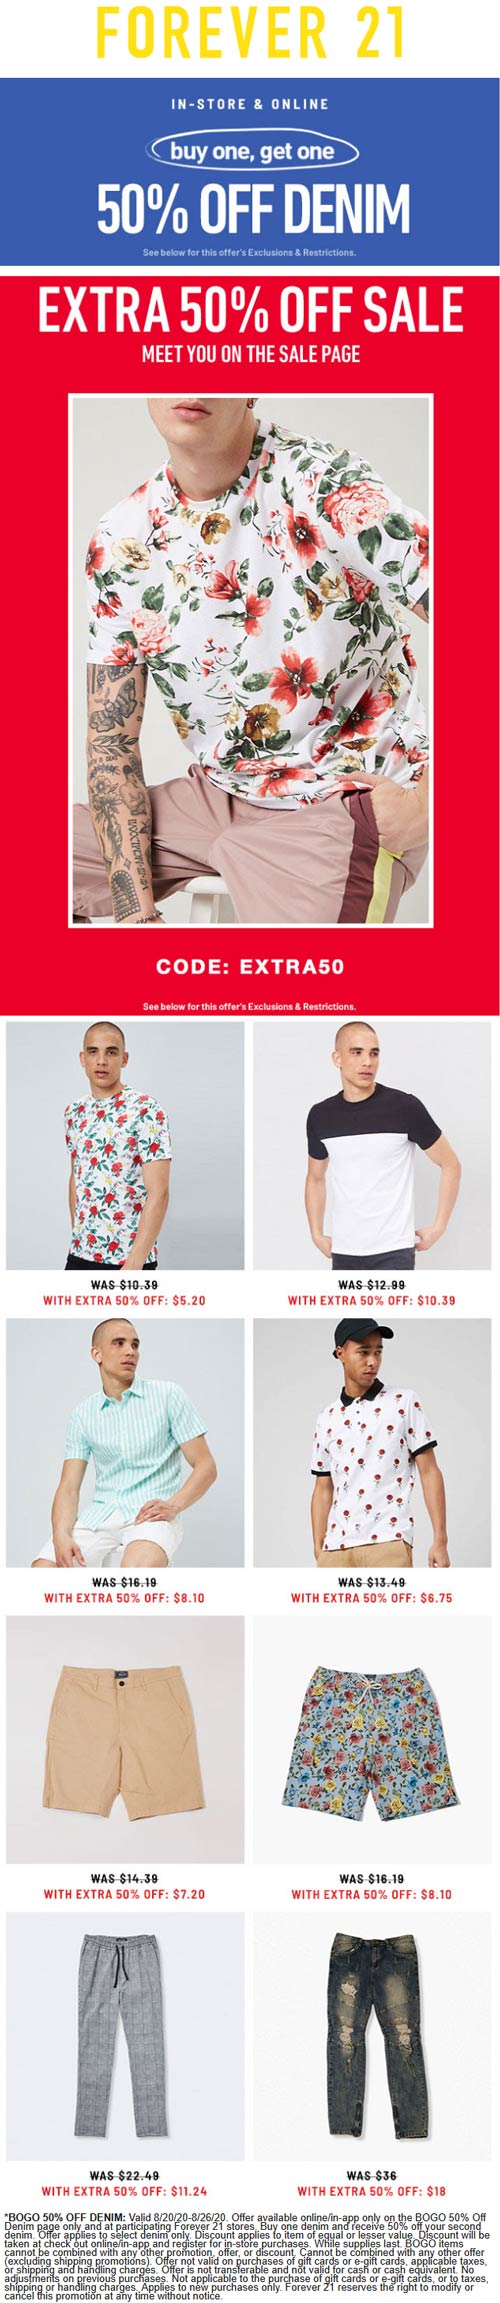 Forever 21 stores Coupon  Extra 50% off sale items & more at Forever 21 #forever21 